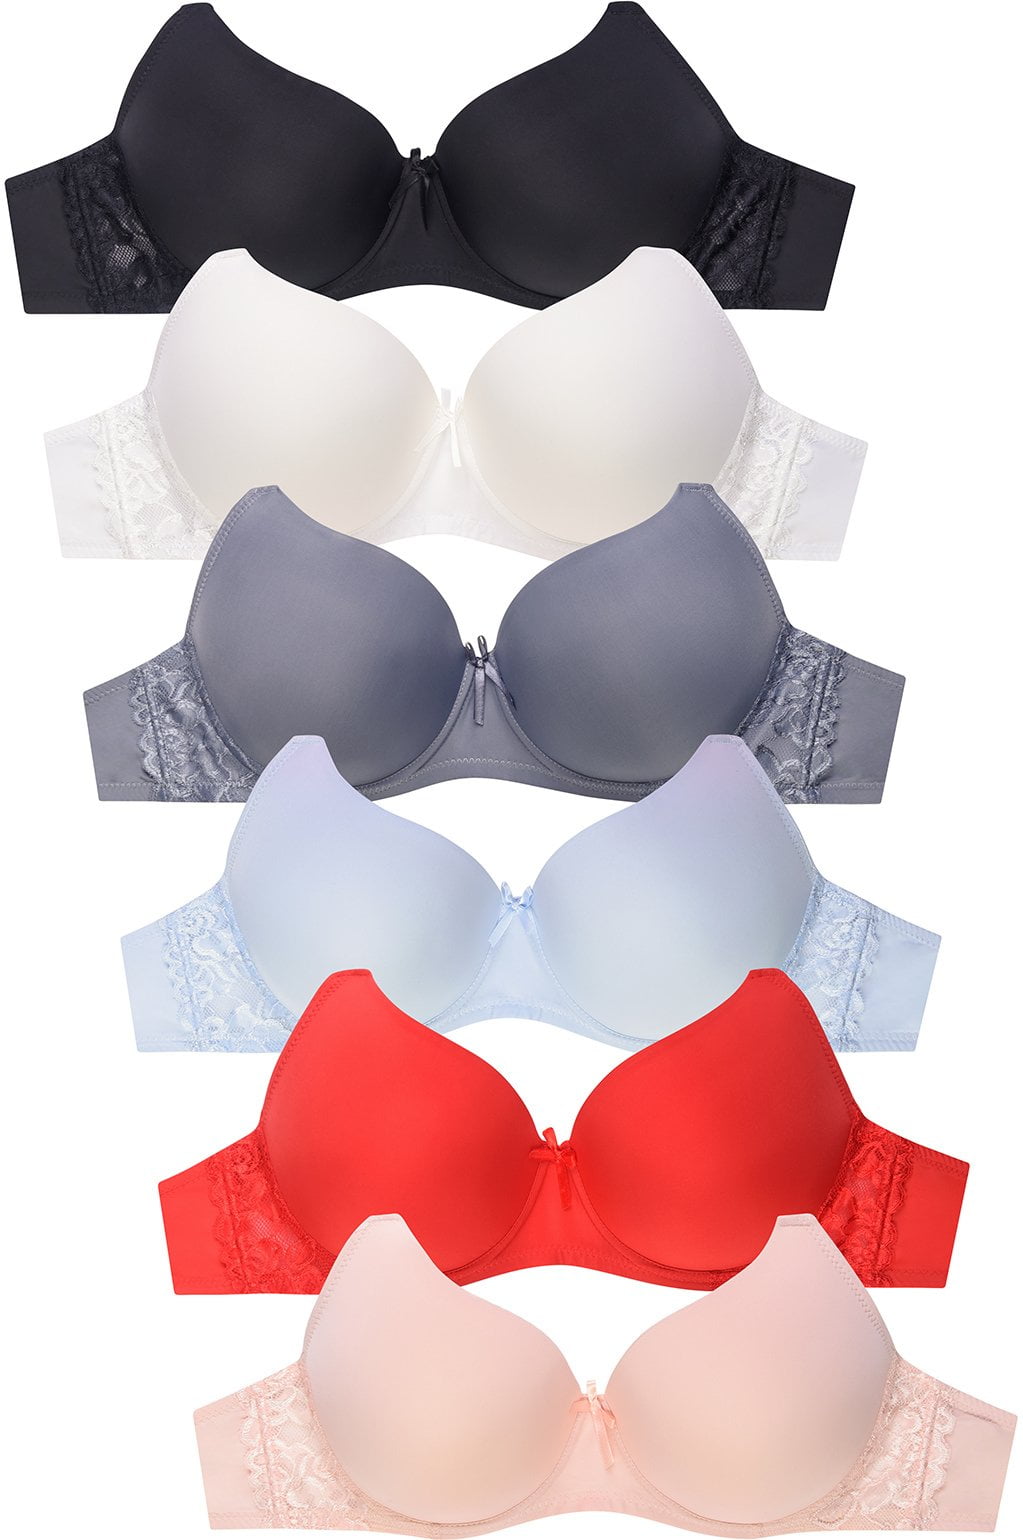 6-PACK Sofra Women's PLUS Full Coverage Lace Accent Bra 